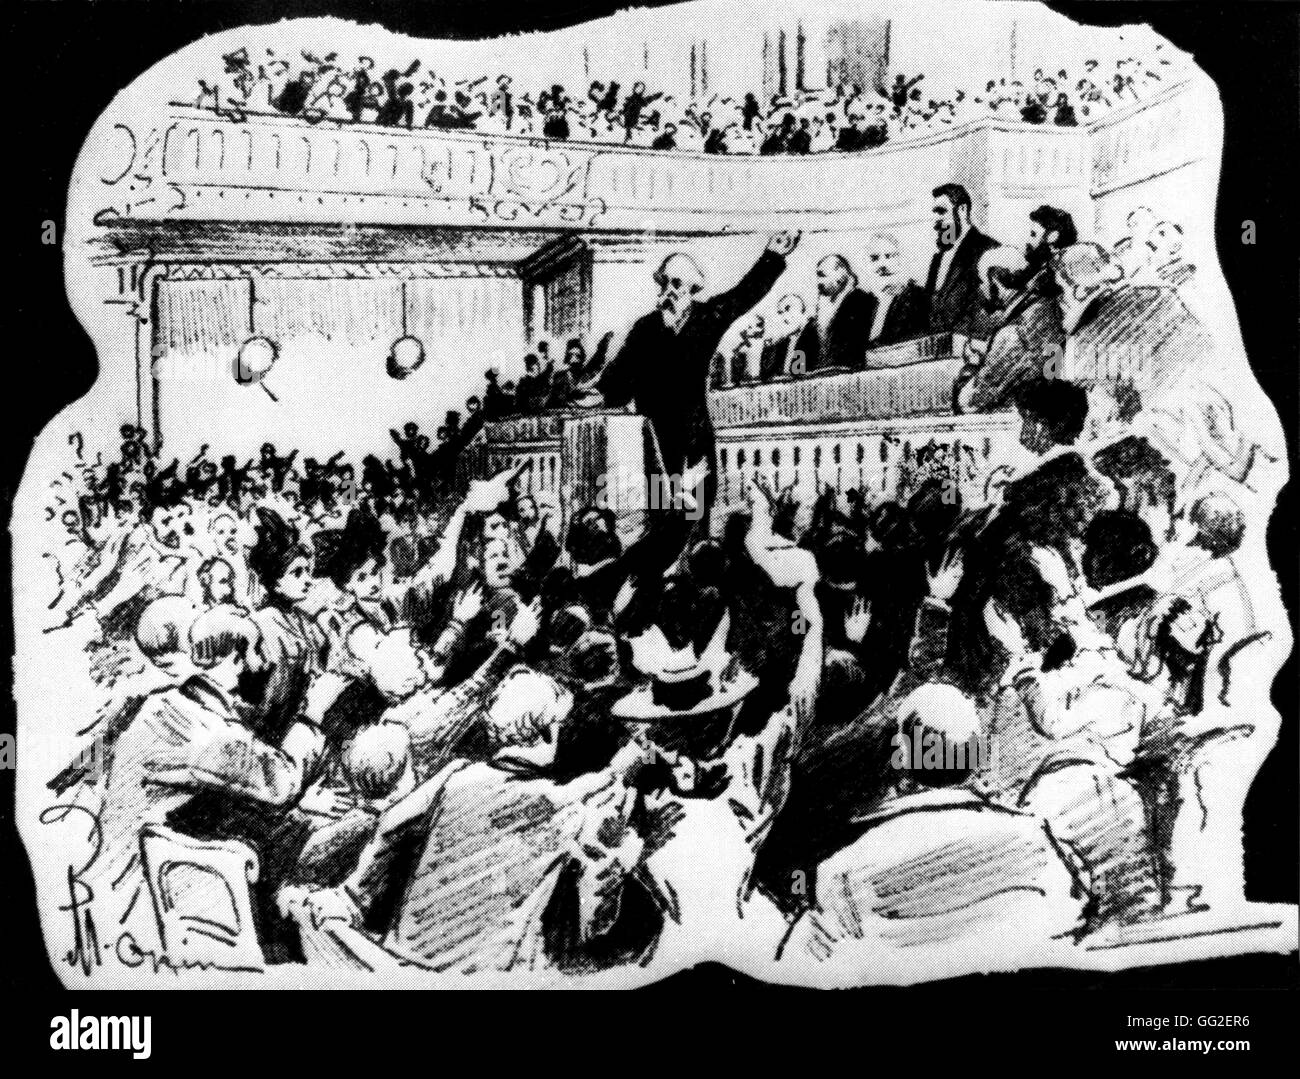 Rabbi Ruelf suggesting a vote to thank the president of the Congress, M. Herzl Illustration by Okin 1898 Zionism Stock Photo